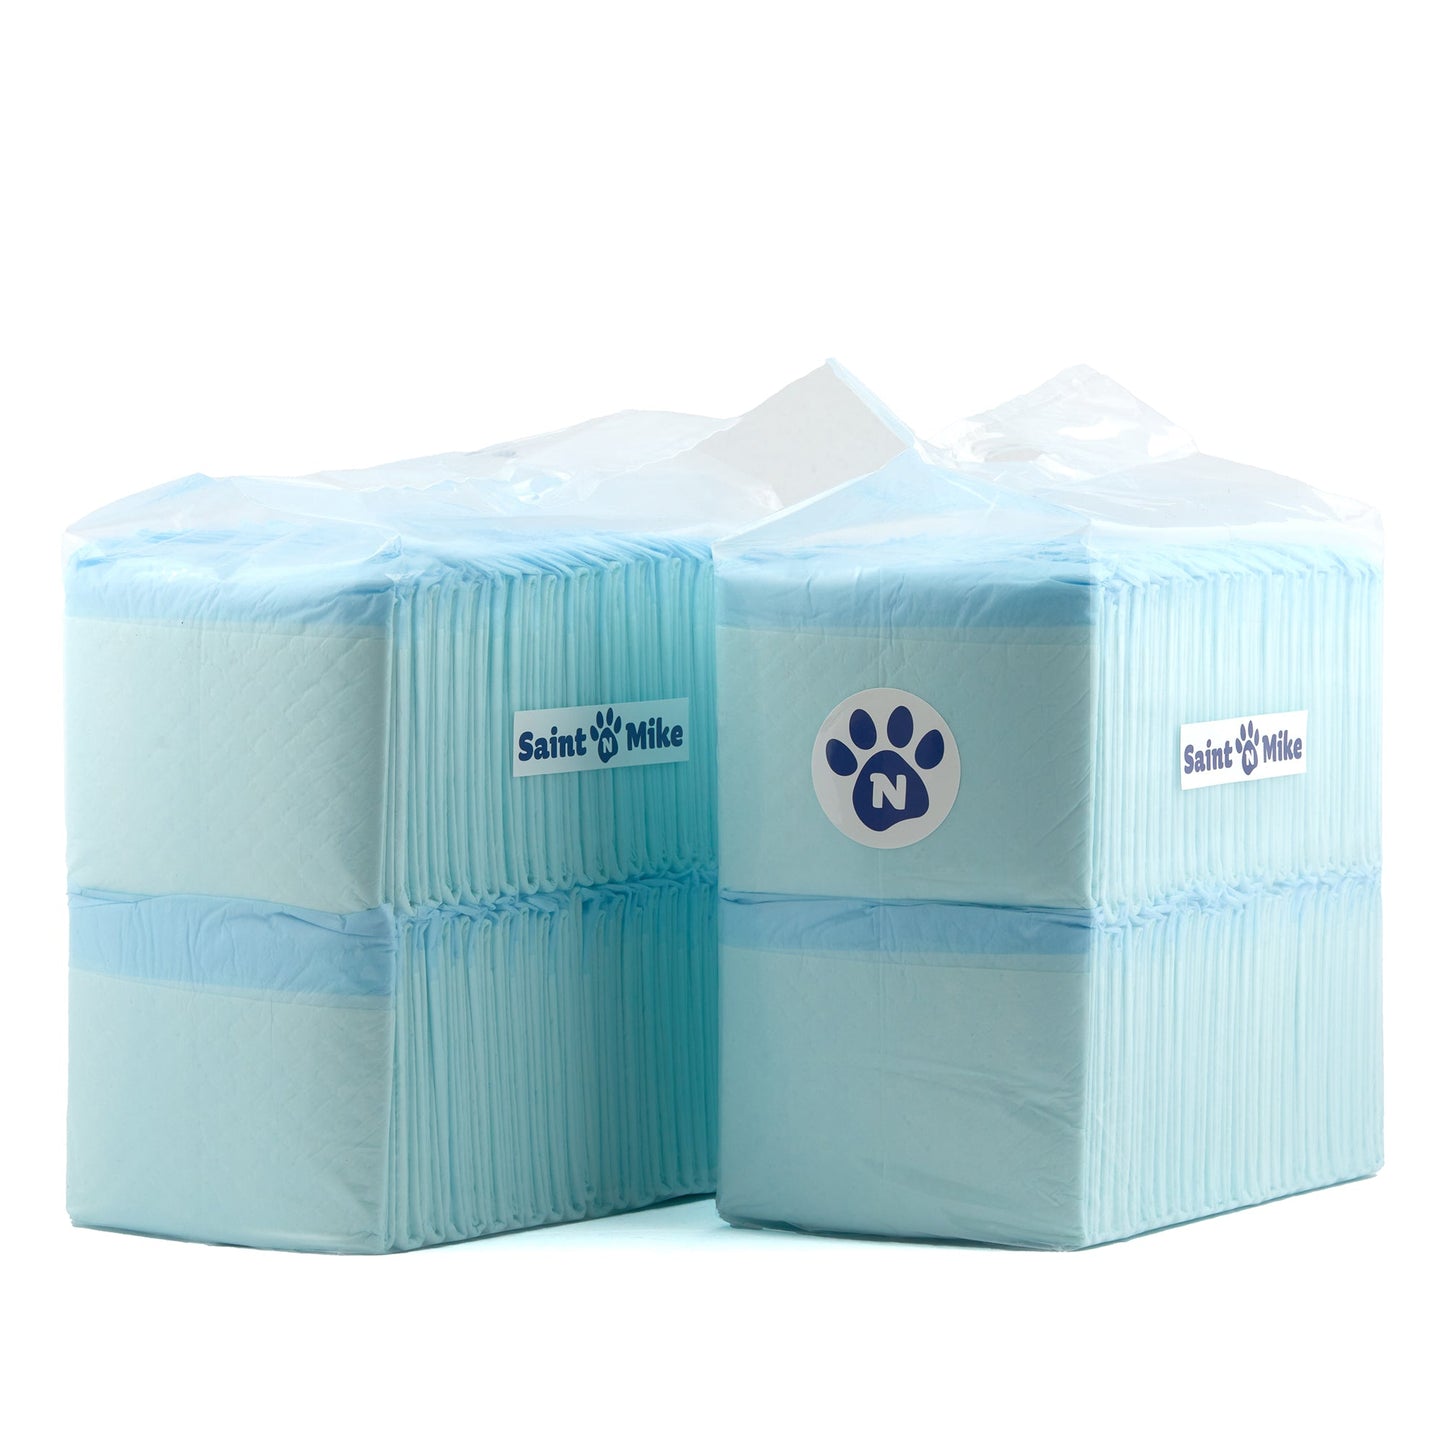 extra large size, 40 count, high-quality puppy pad | leak-proof for hassle-free house training1